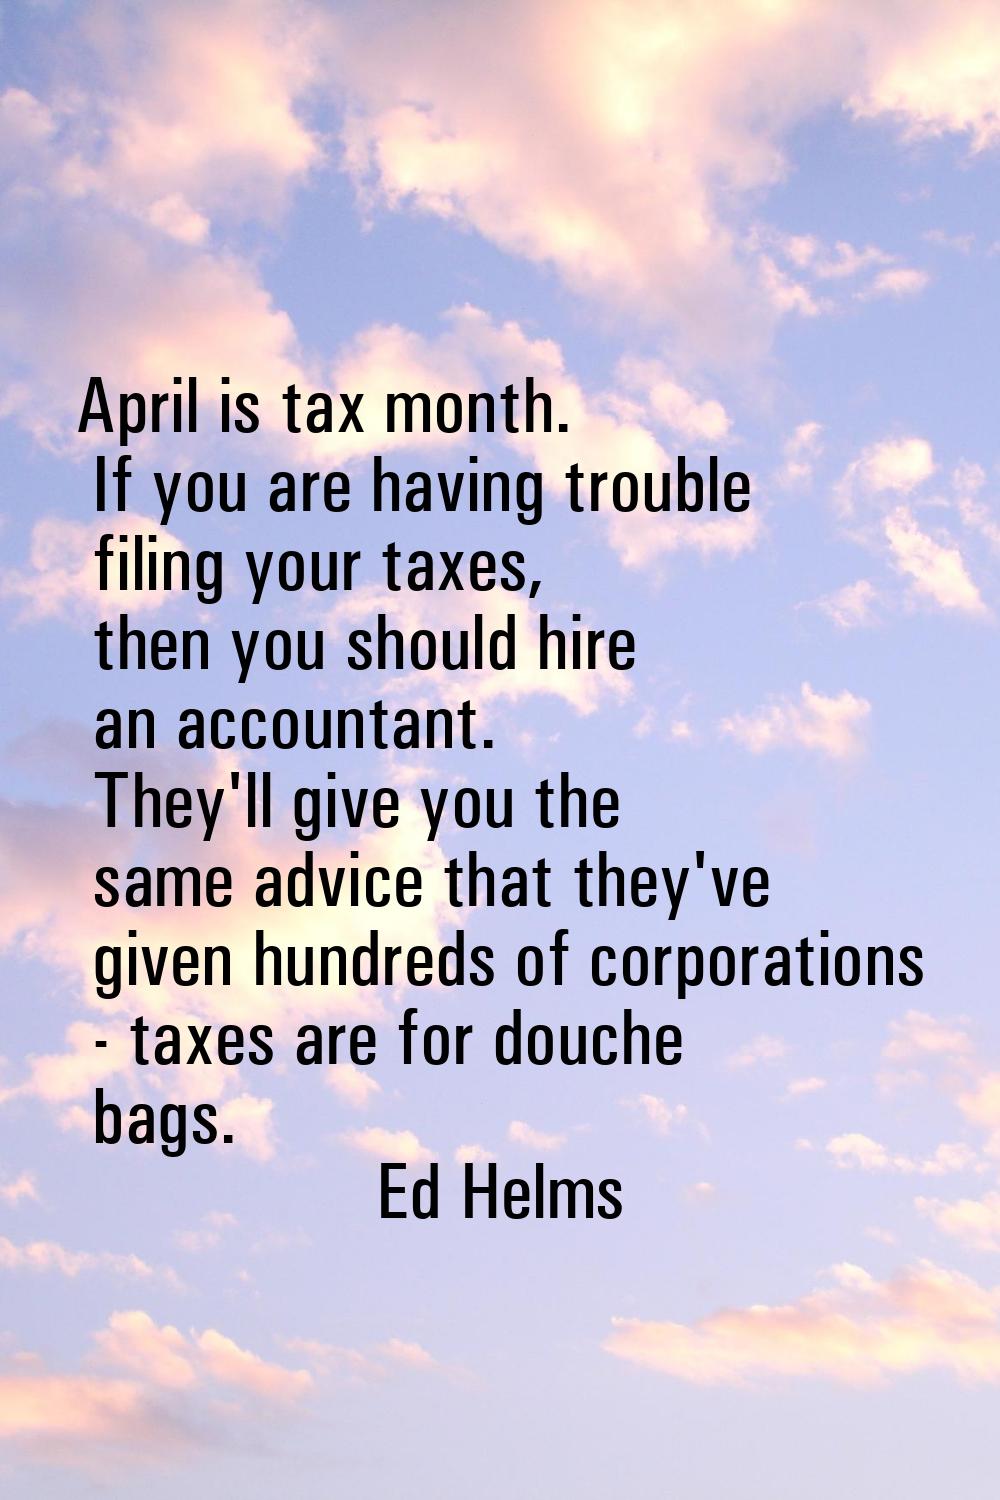 April is tax month. If you are having trouble filing your taxes, then you should hire an accountant